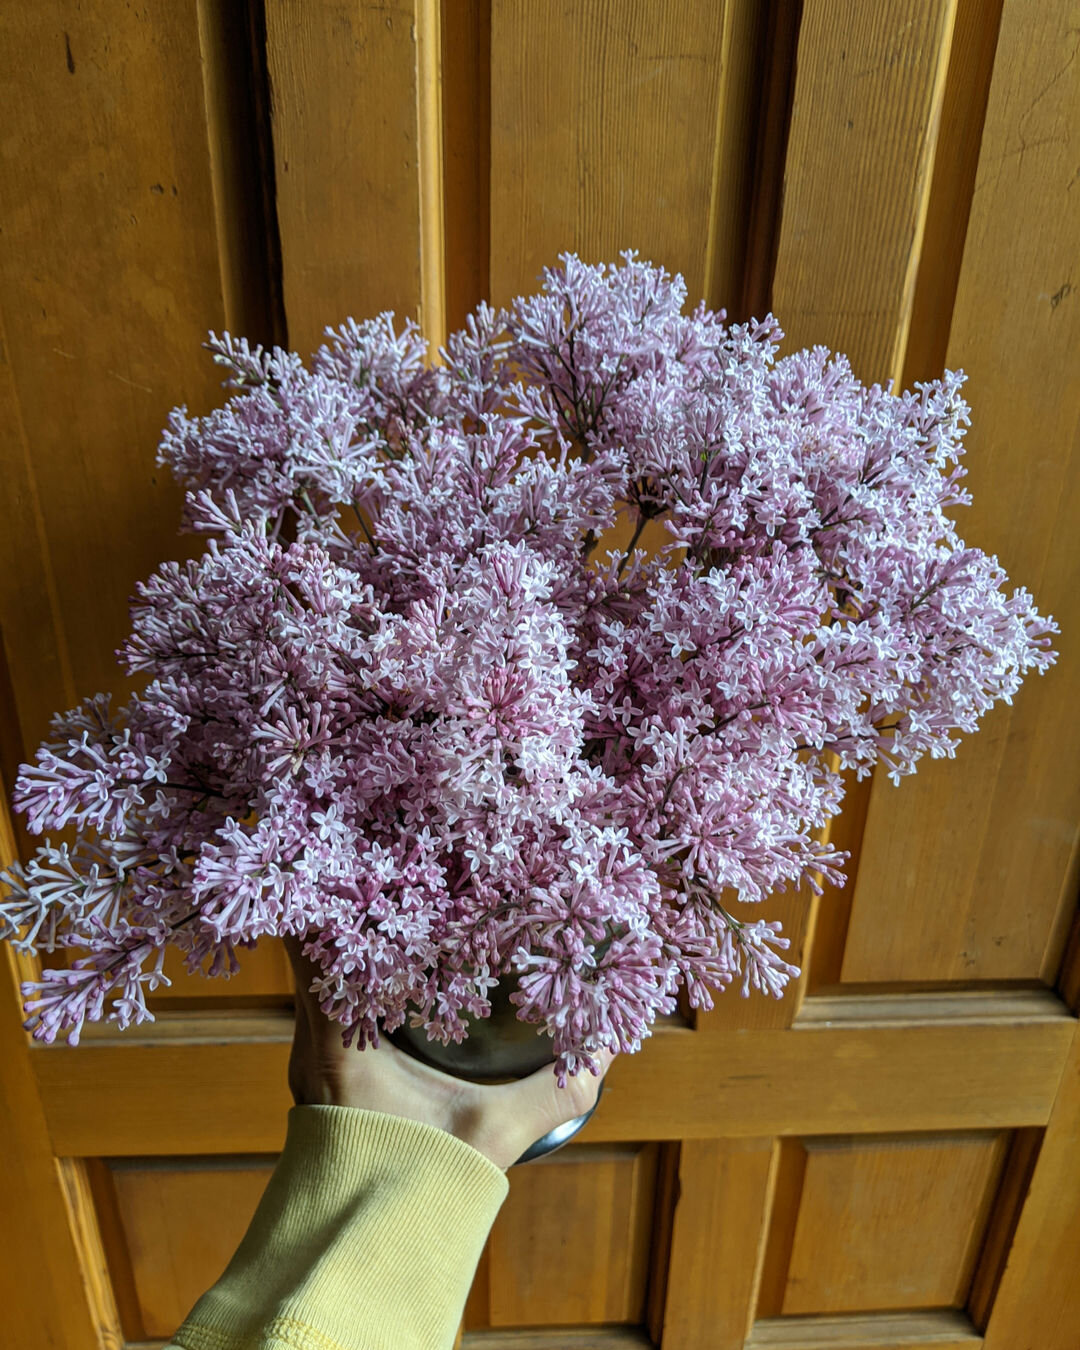 It's almost that time of year again, Lilac season! ​​​​​​​​
​​​​​​​​
They are such a treat every spring and bring some much needed color to our monochromatic world🤍​​​​​​​​
​​​​​​​​
​​​​​​​​
​​​​​​​​
#lilac #purpleflowers #weddingdlorist #weddingflo